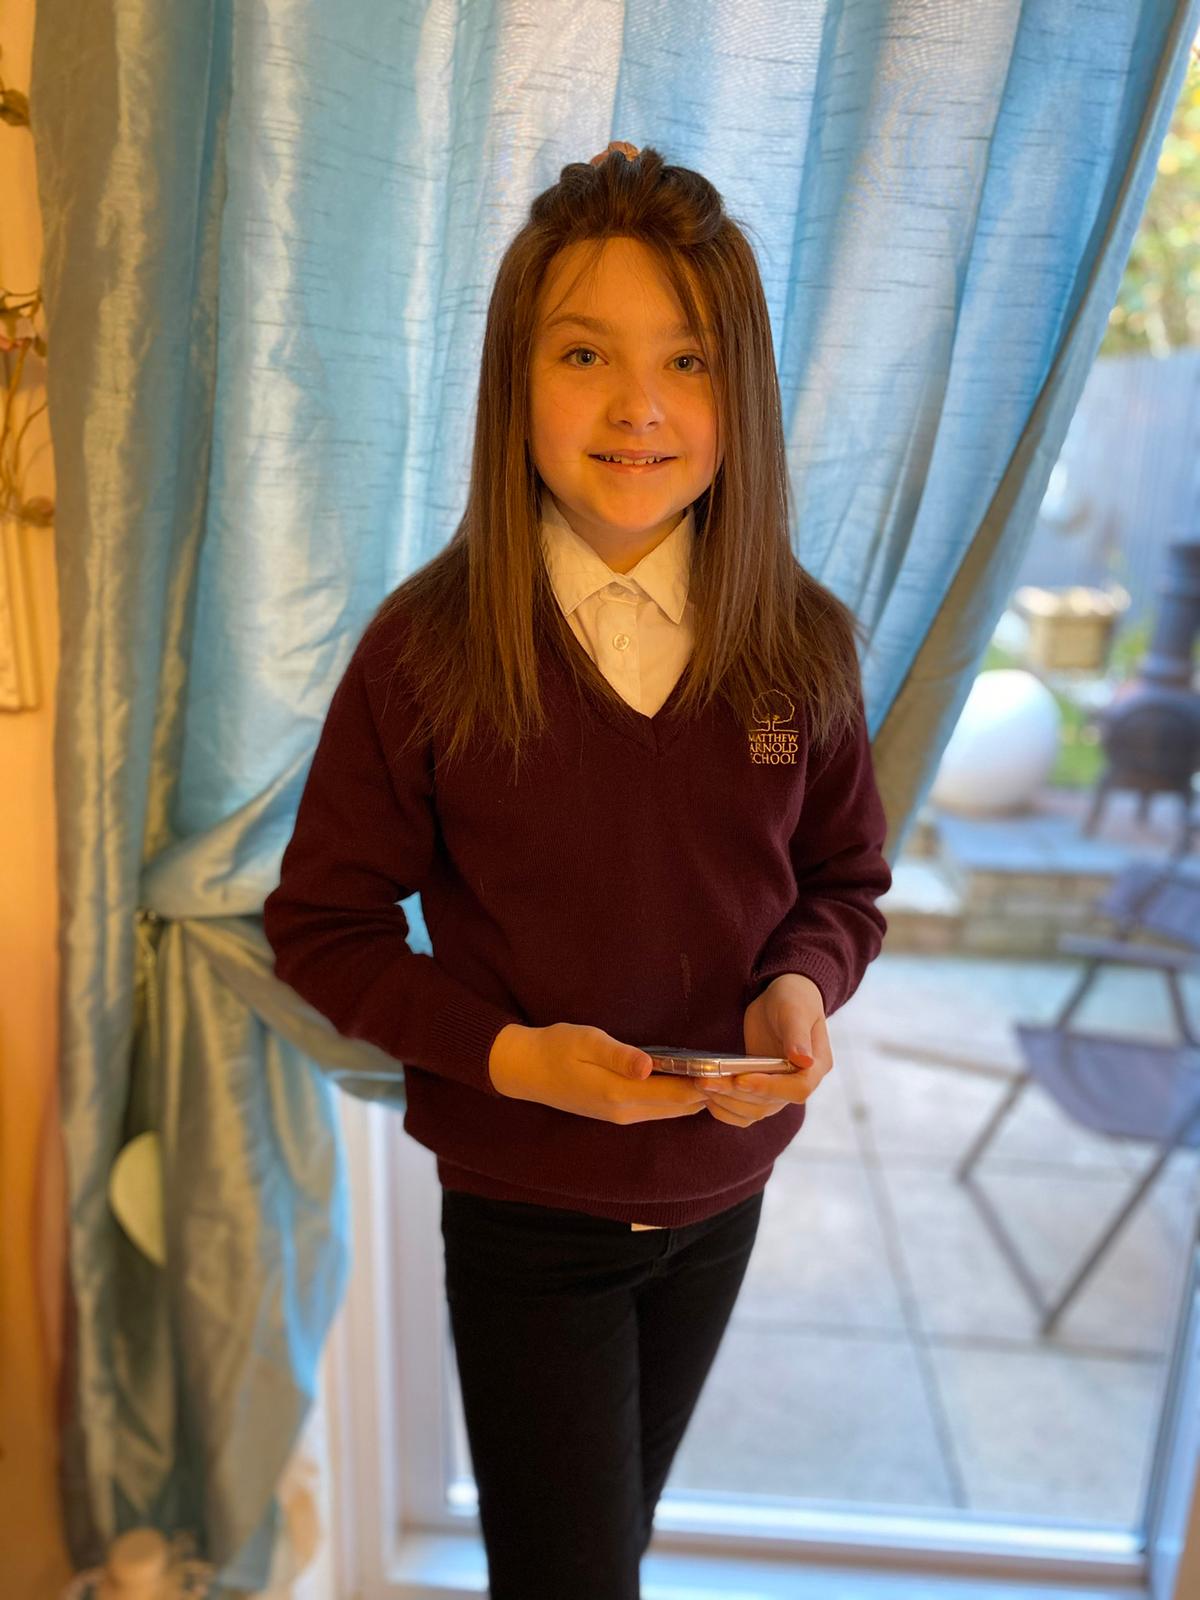 Lola wearing a wig gifted from the Little Princess Trust. (Caters News)